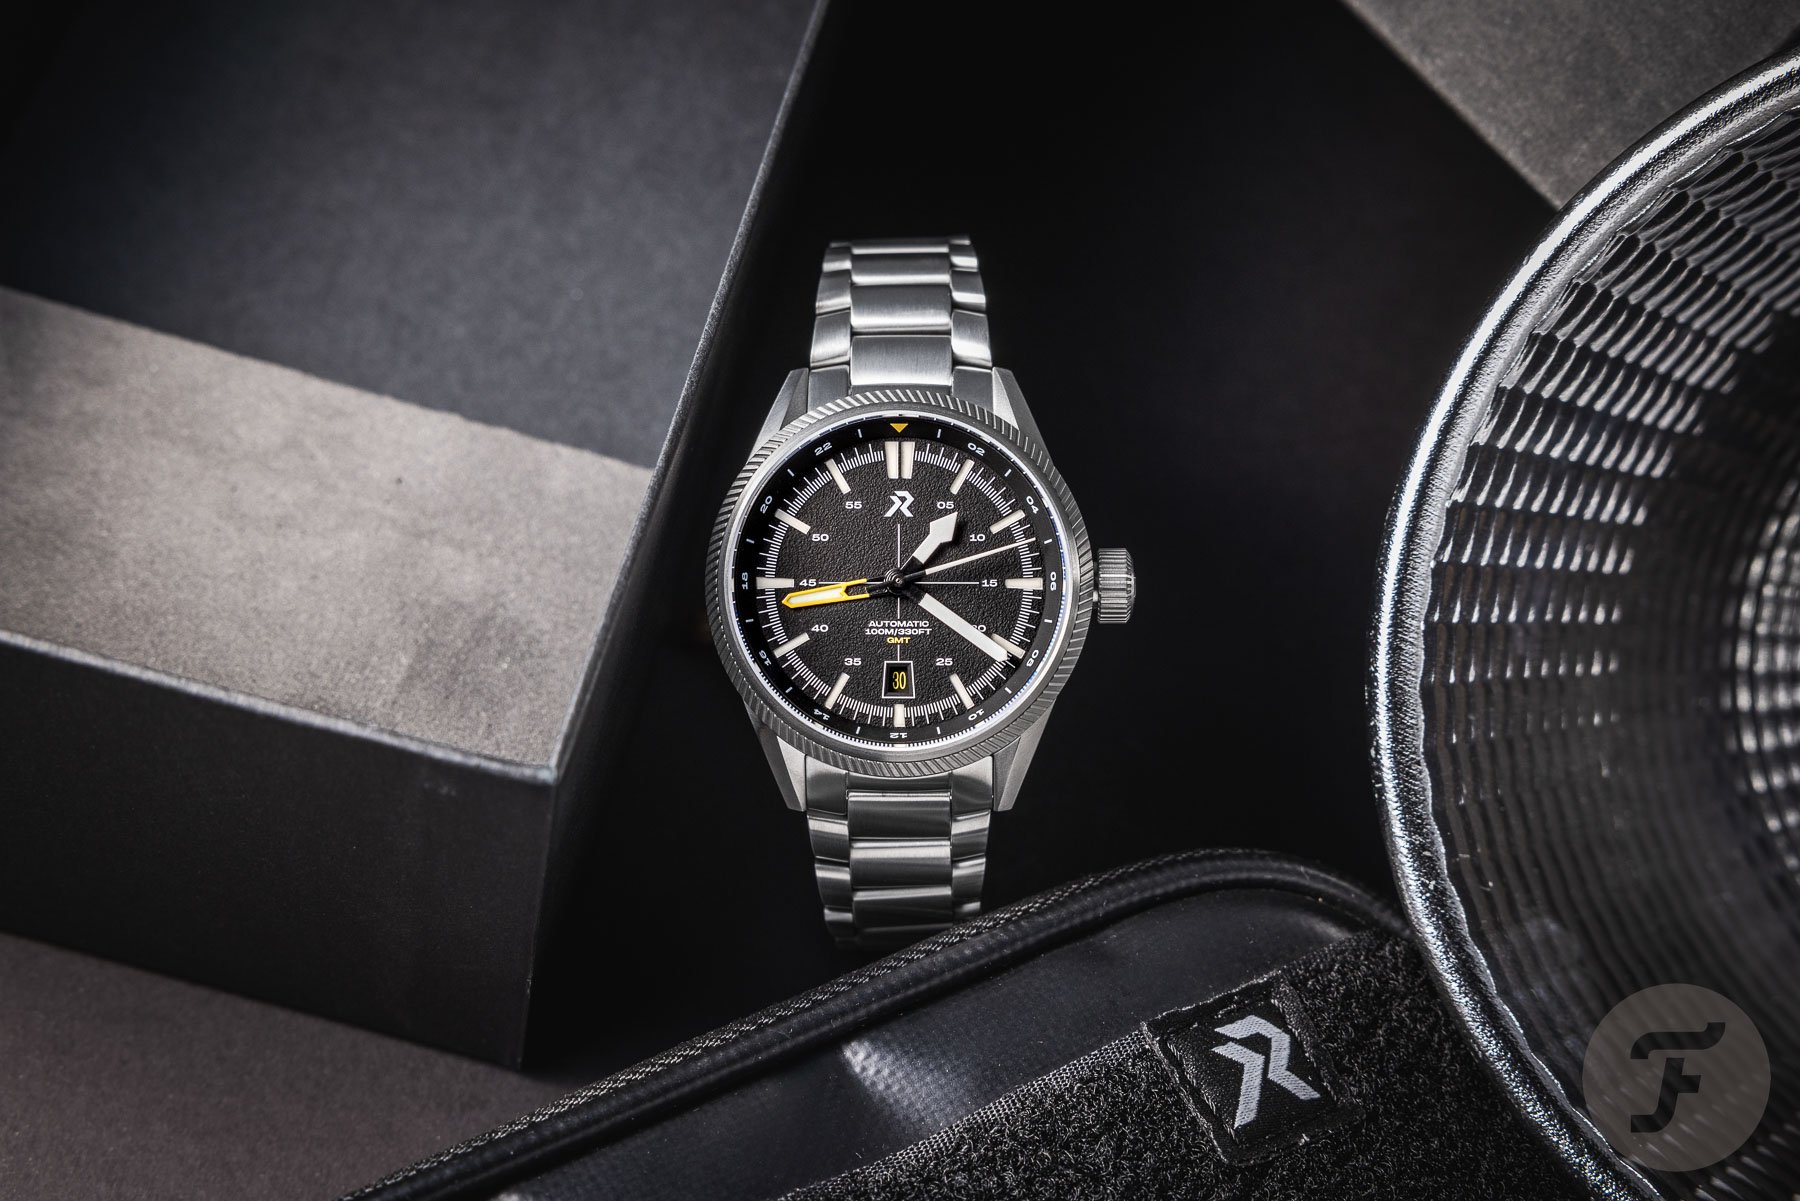 Fratello Favorites: The Best Watches Under €1,000 — Jorg’s Picks From Serica, RZE, And Traska